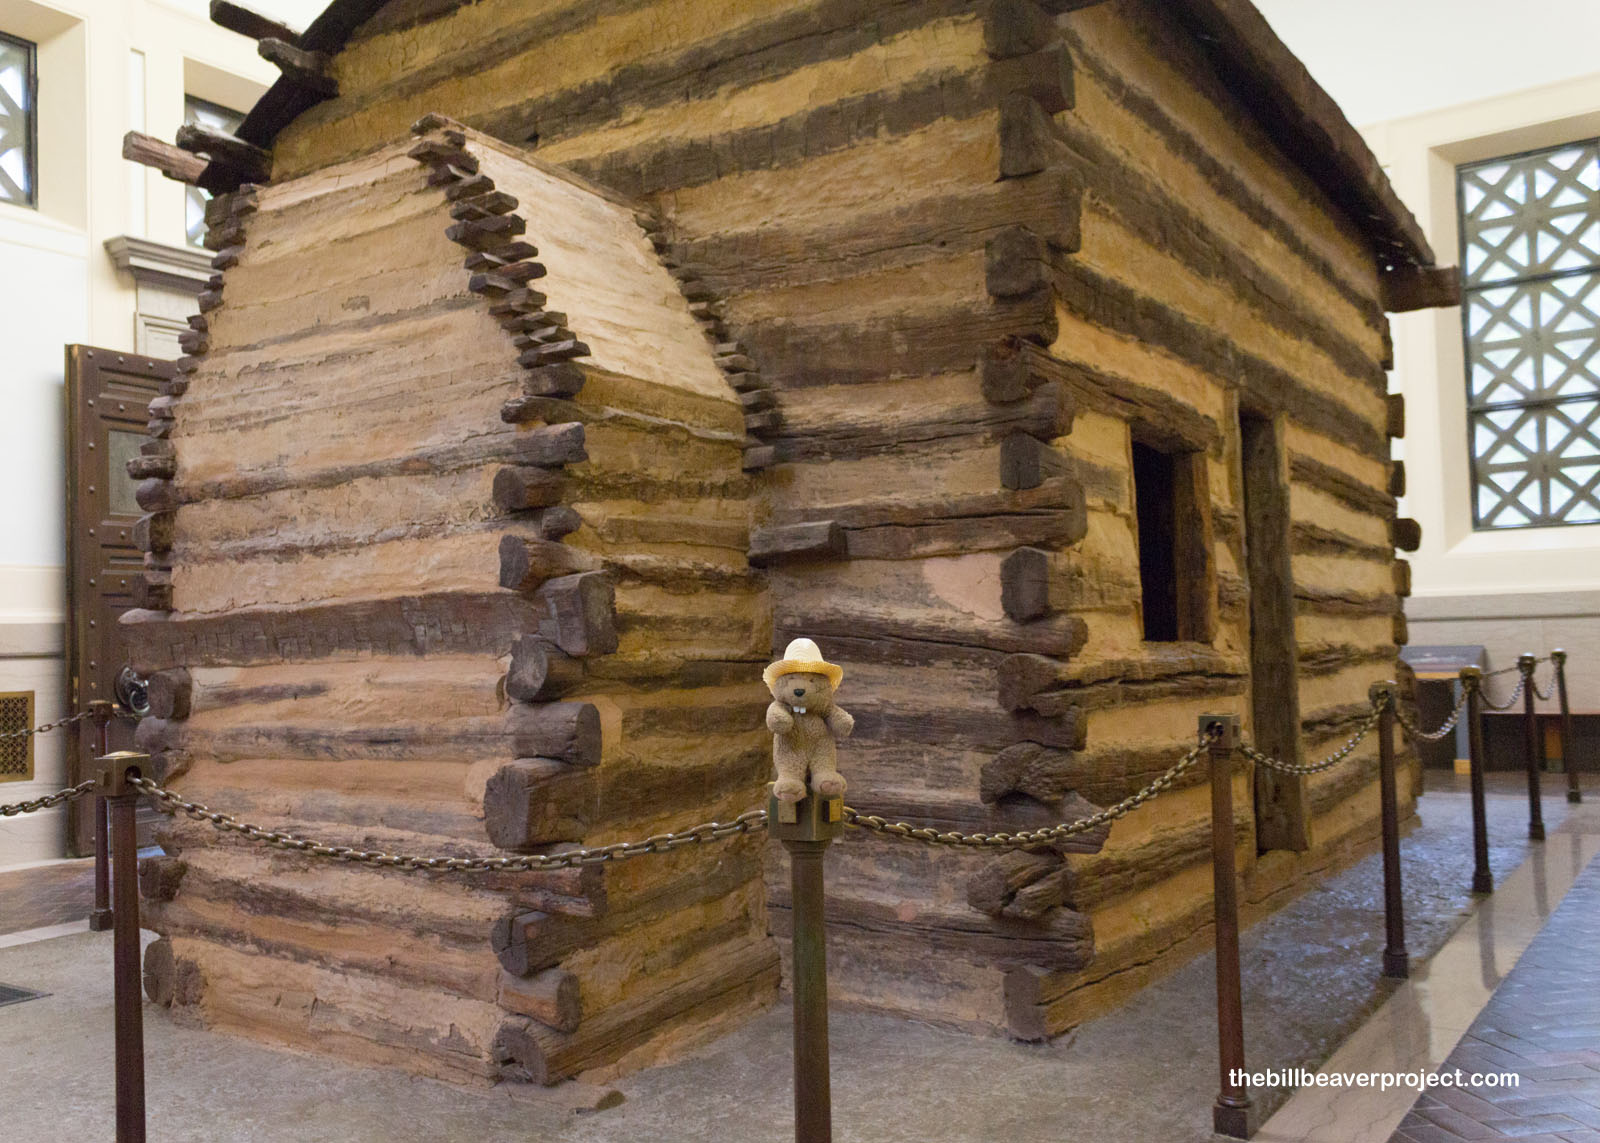 A reconstruction of the humble cabin where Abe was born!